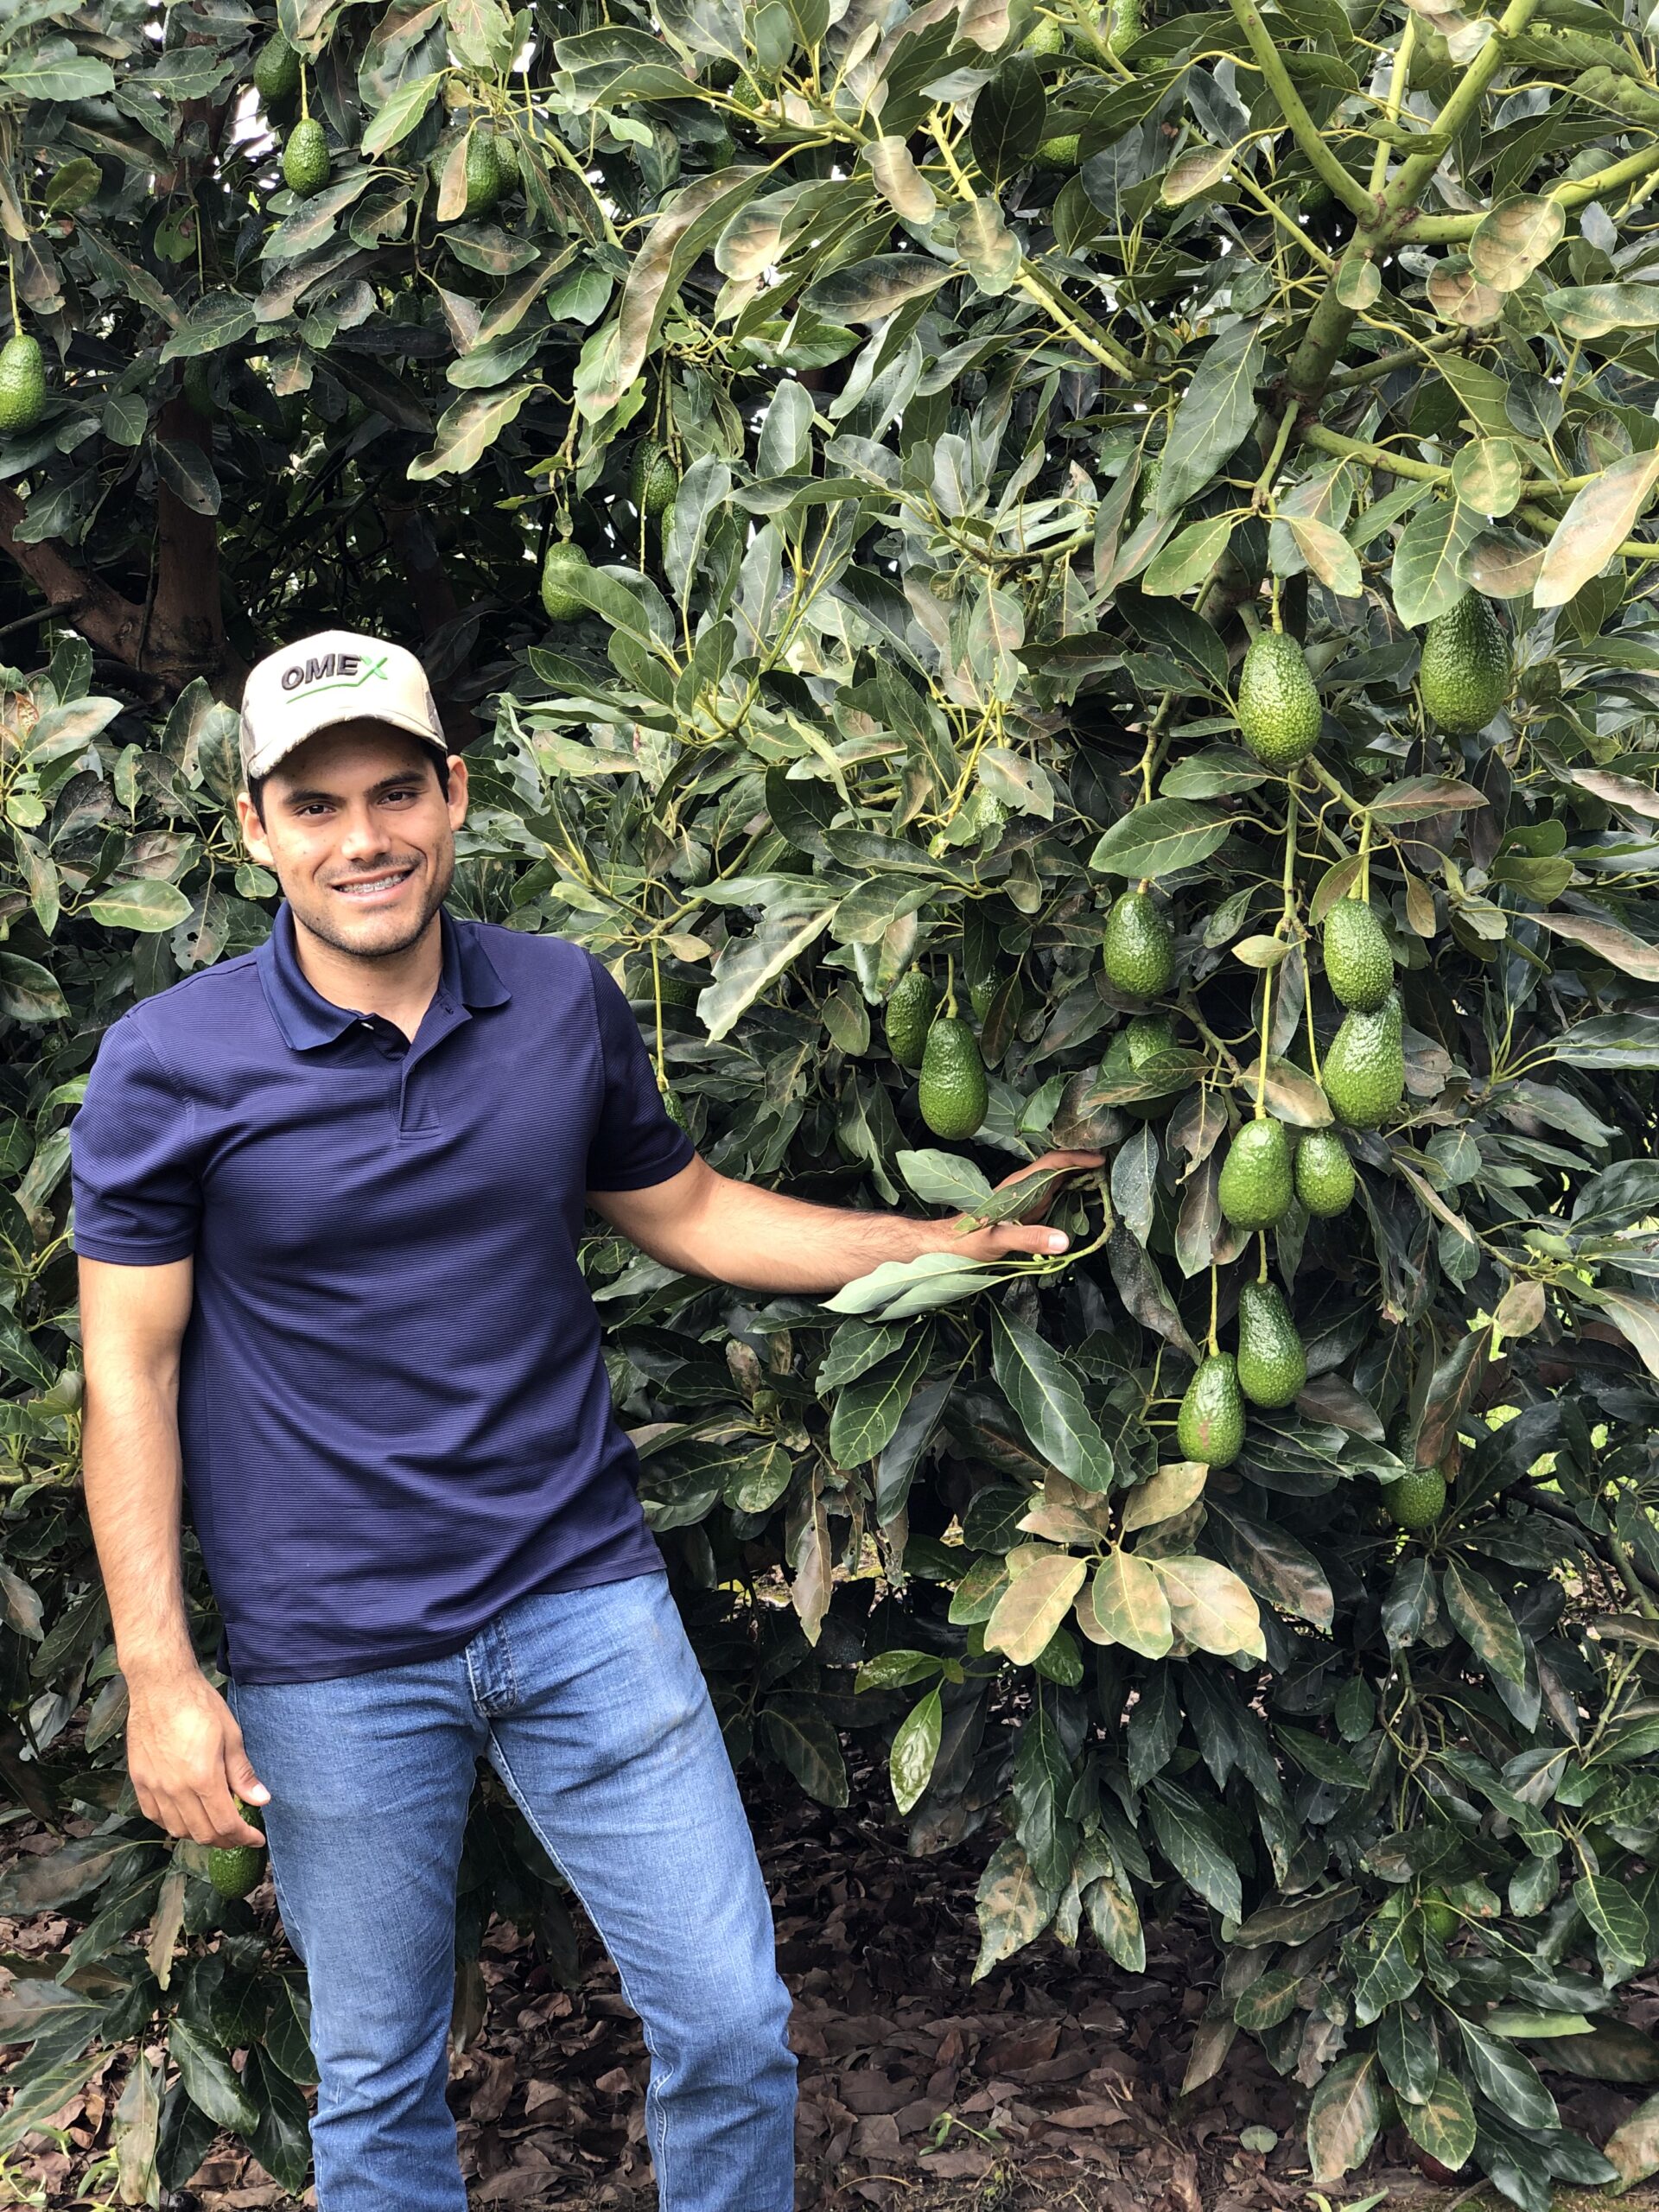 OMEX Program Achieves Awesome Avocados in Mexico